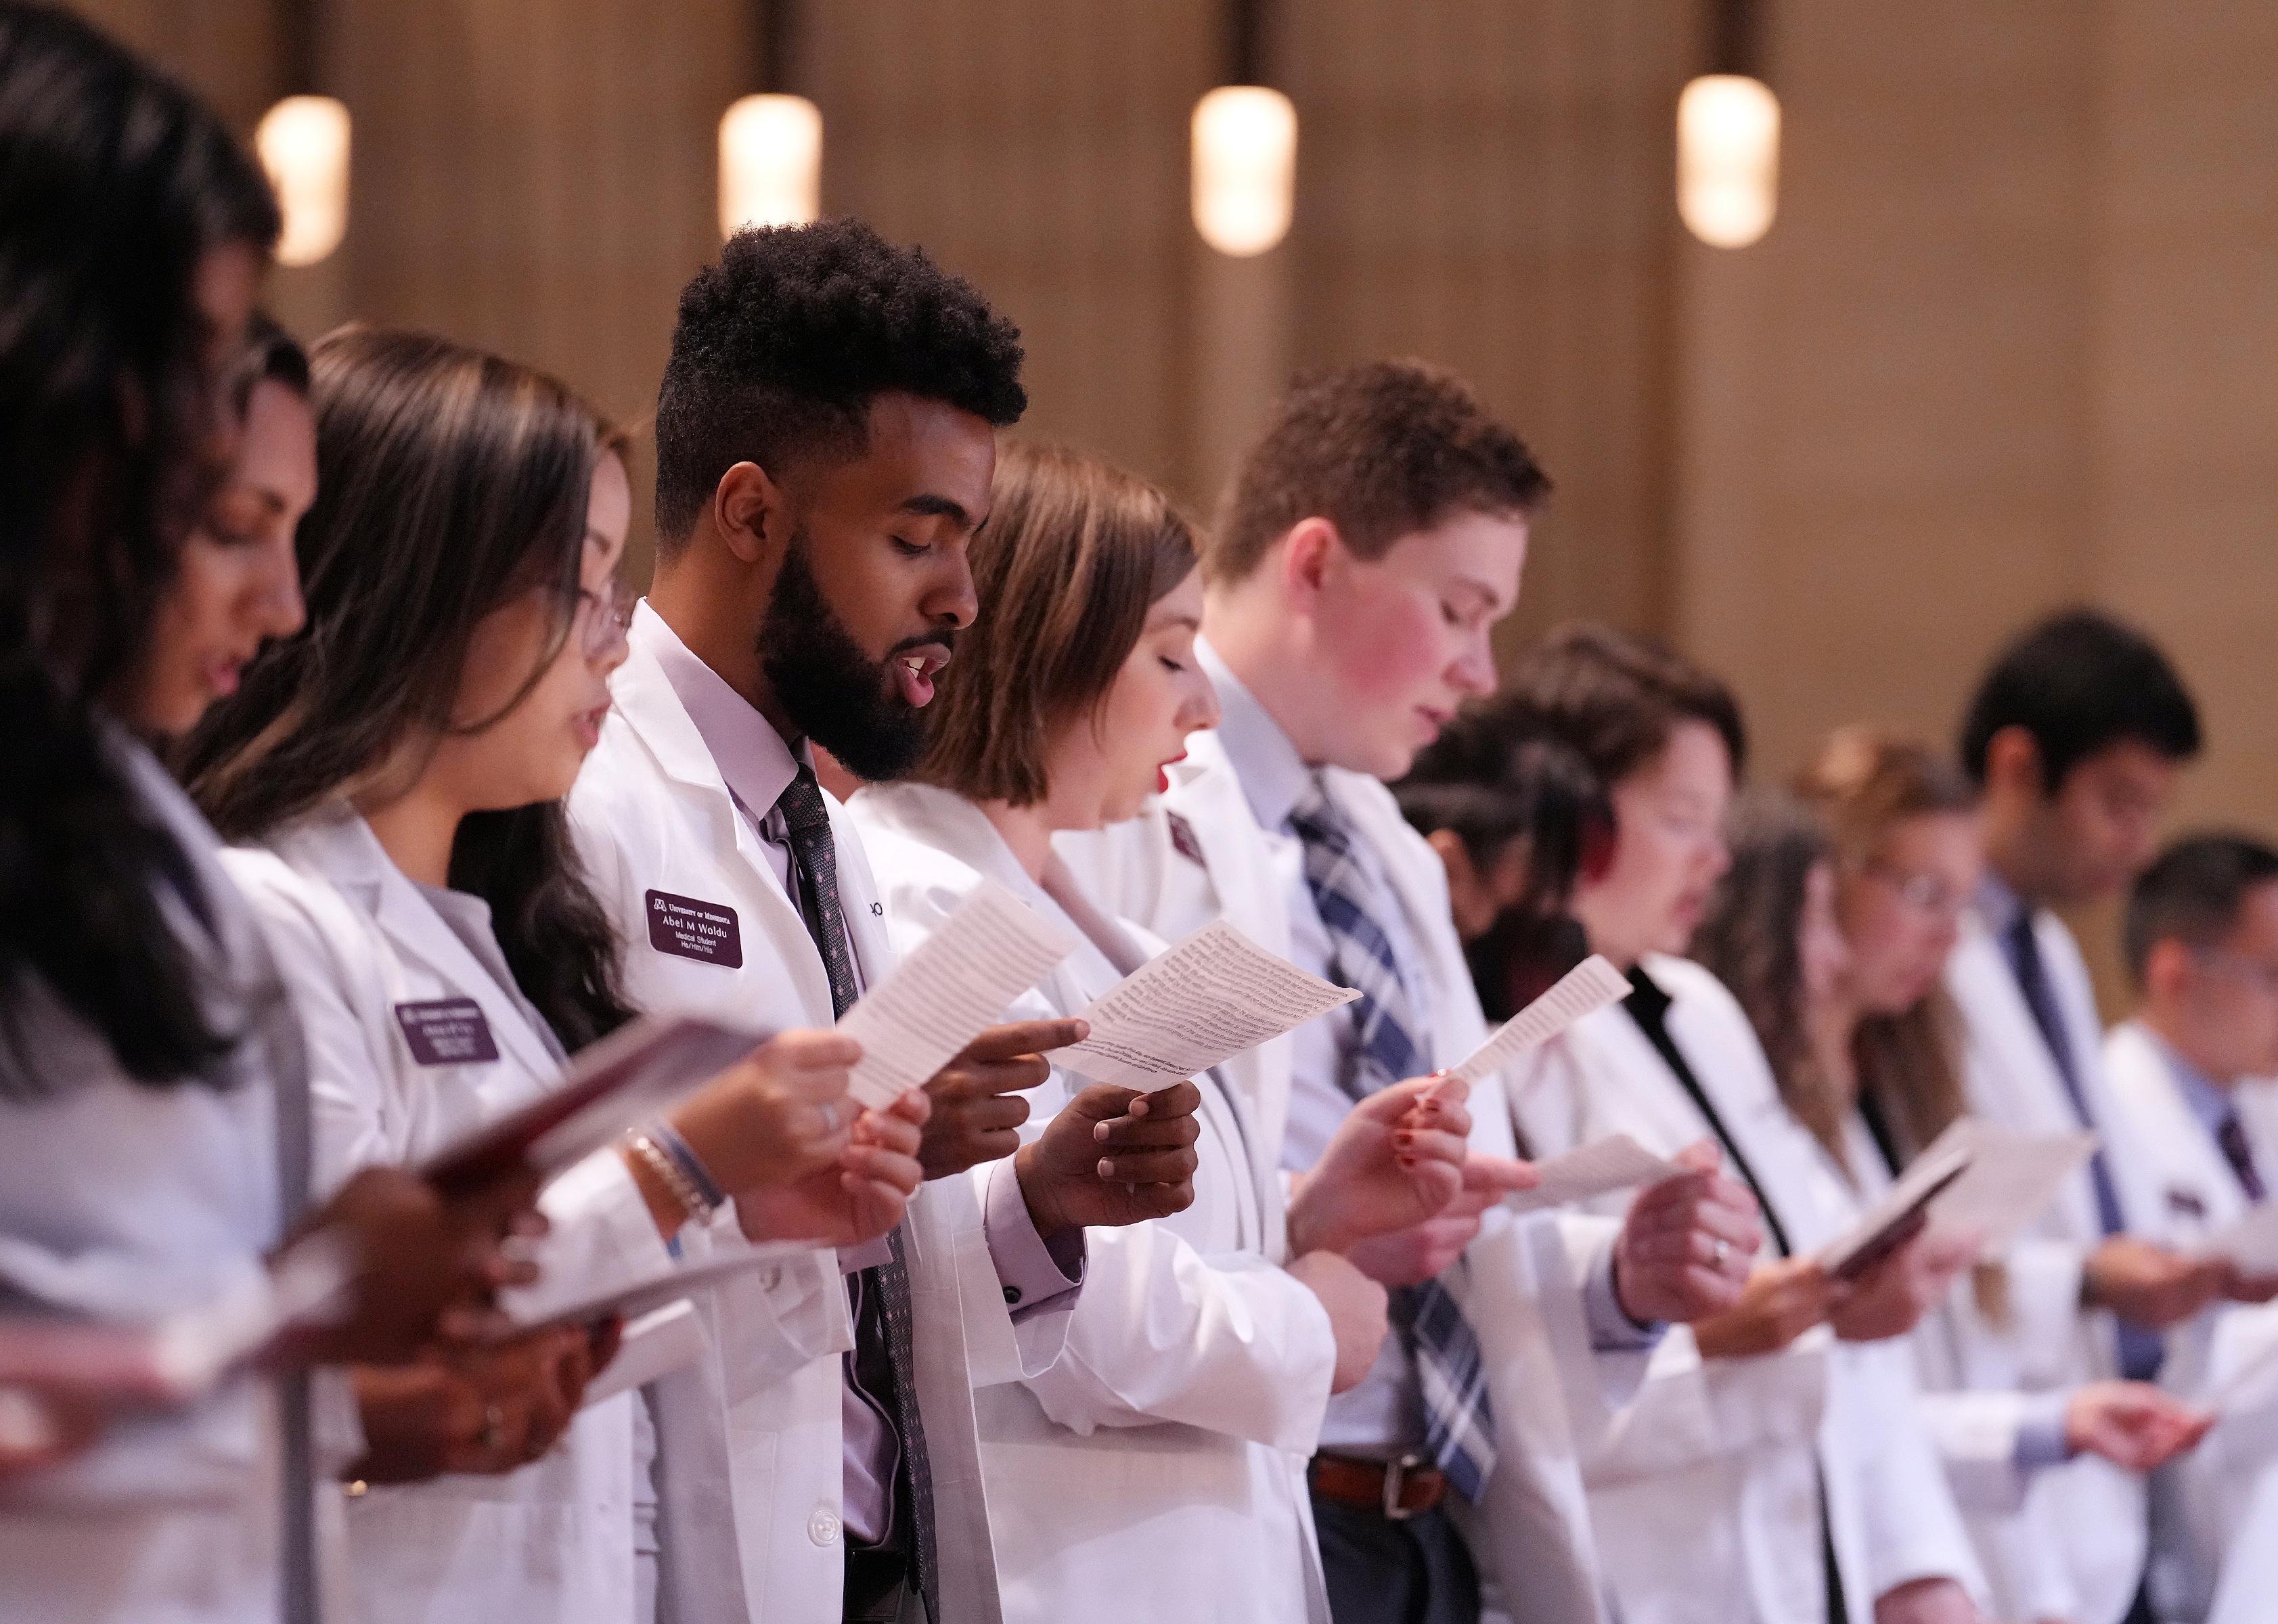 Medical students in white coats reciting a medical oath.